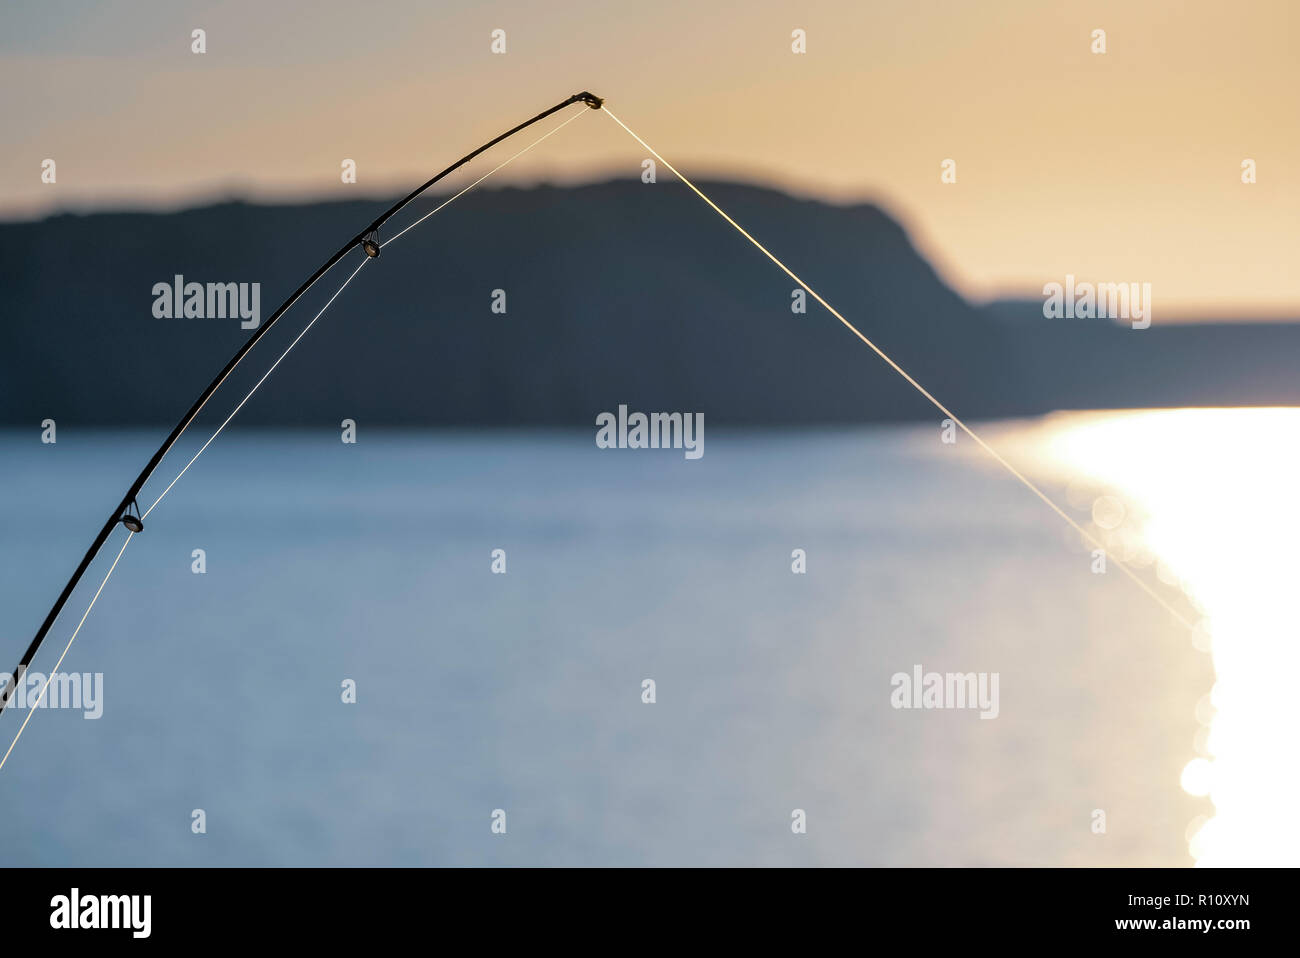 BENT  SEA FISHING ROD AND TIGHT LINE Stock Photo